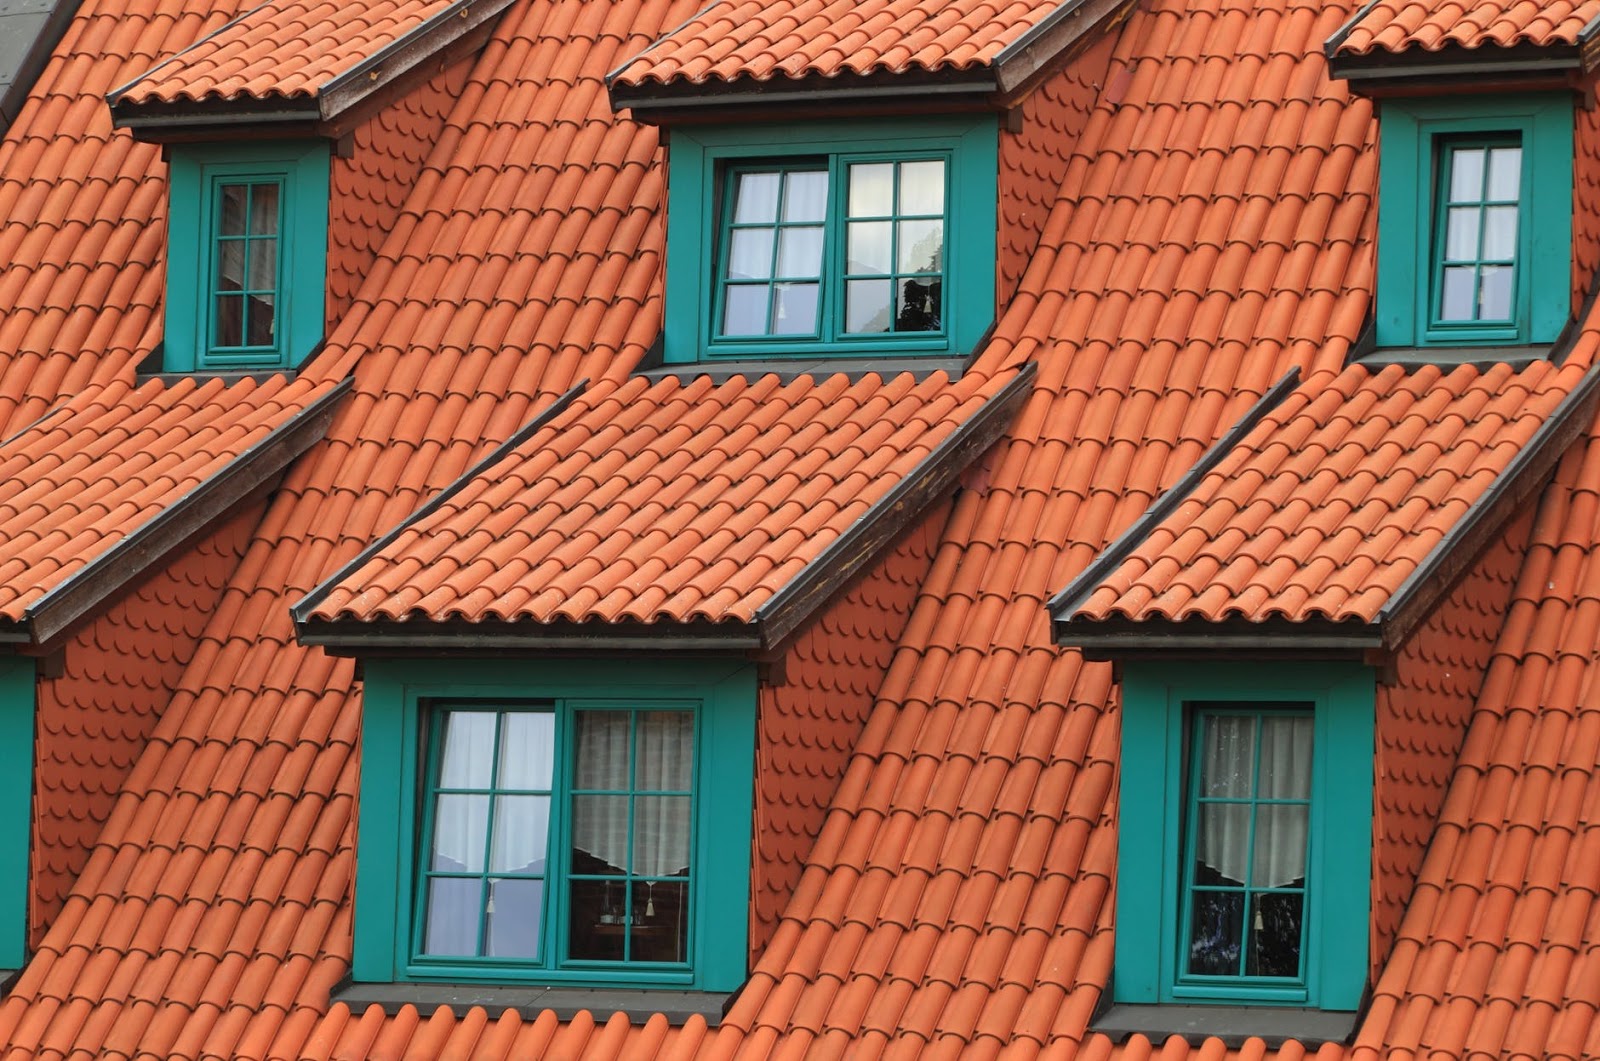 5 Unique Ecofriendly Roofing Ideas For Your Home